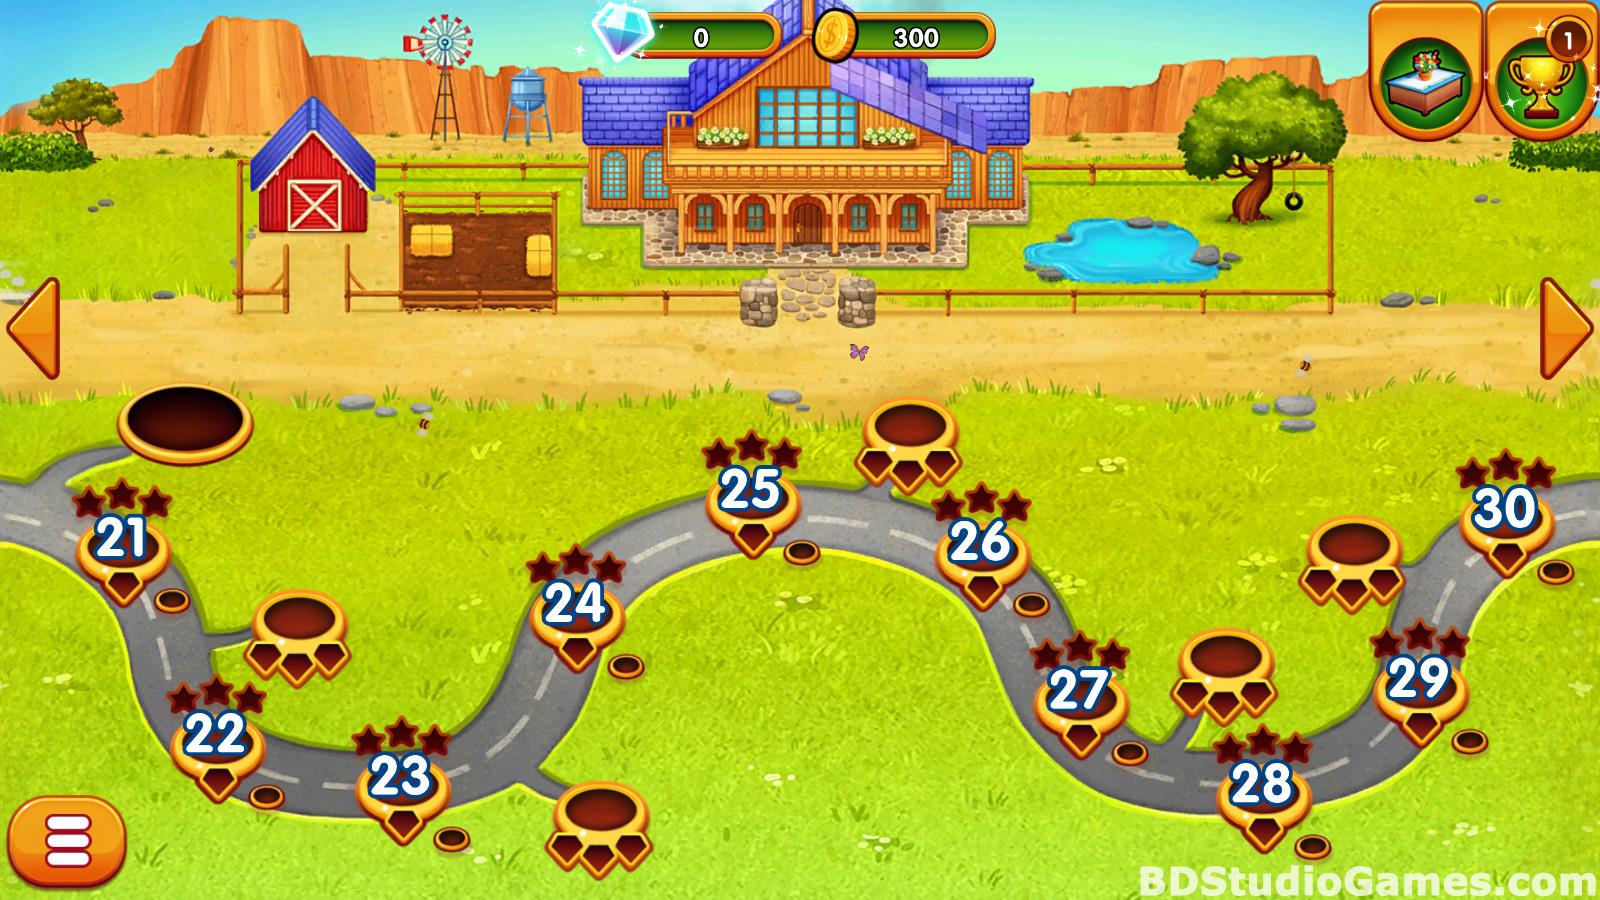 Delicious: Emily's Road Trip Game Download - BDStudioGames